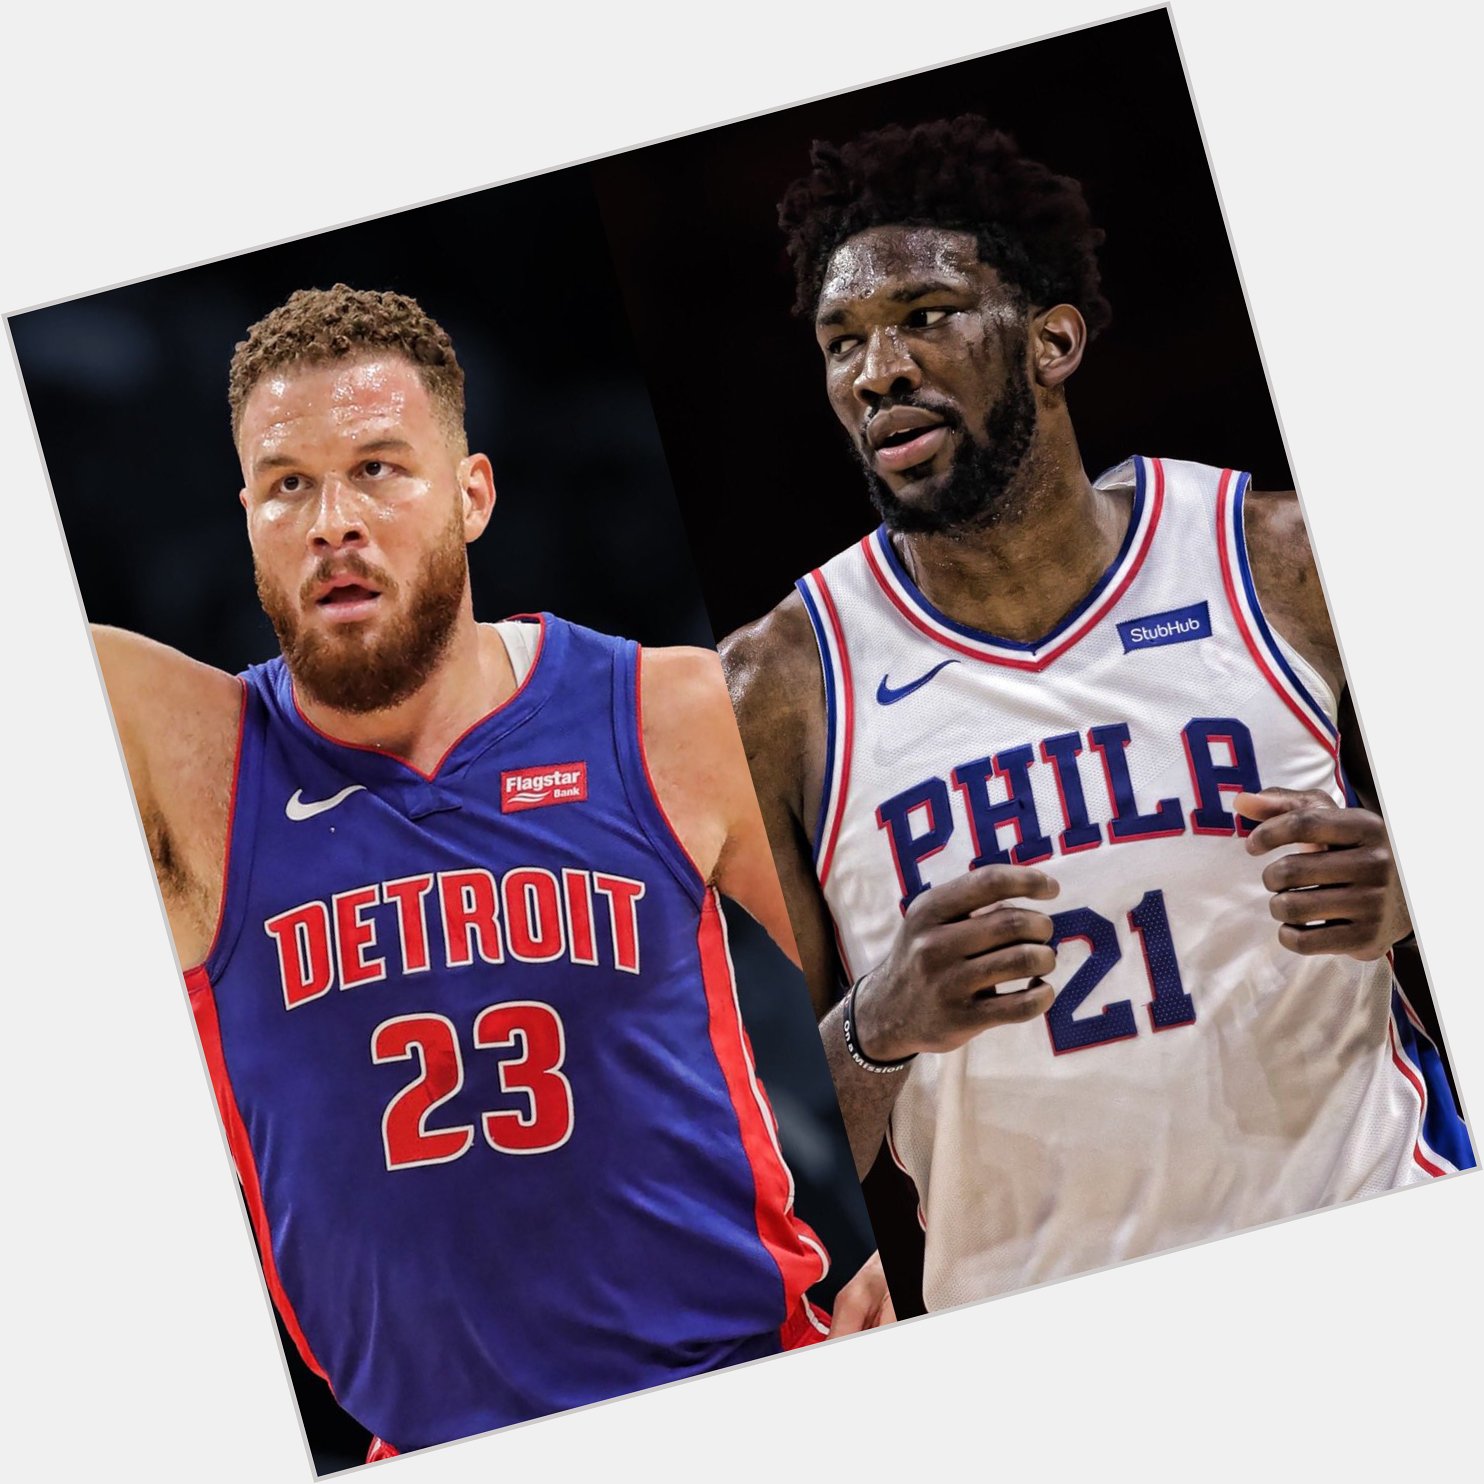 Happy 31st birthday to Blake Griffin, and Happy 26th birthday to Joel Embiid! 